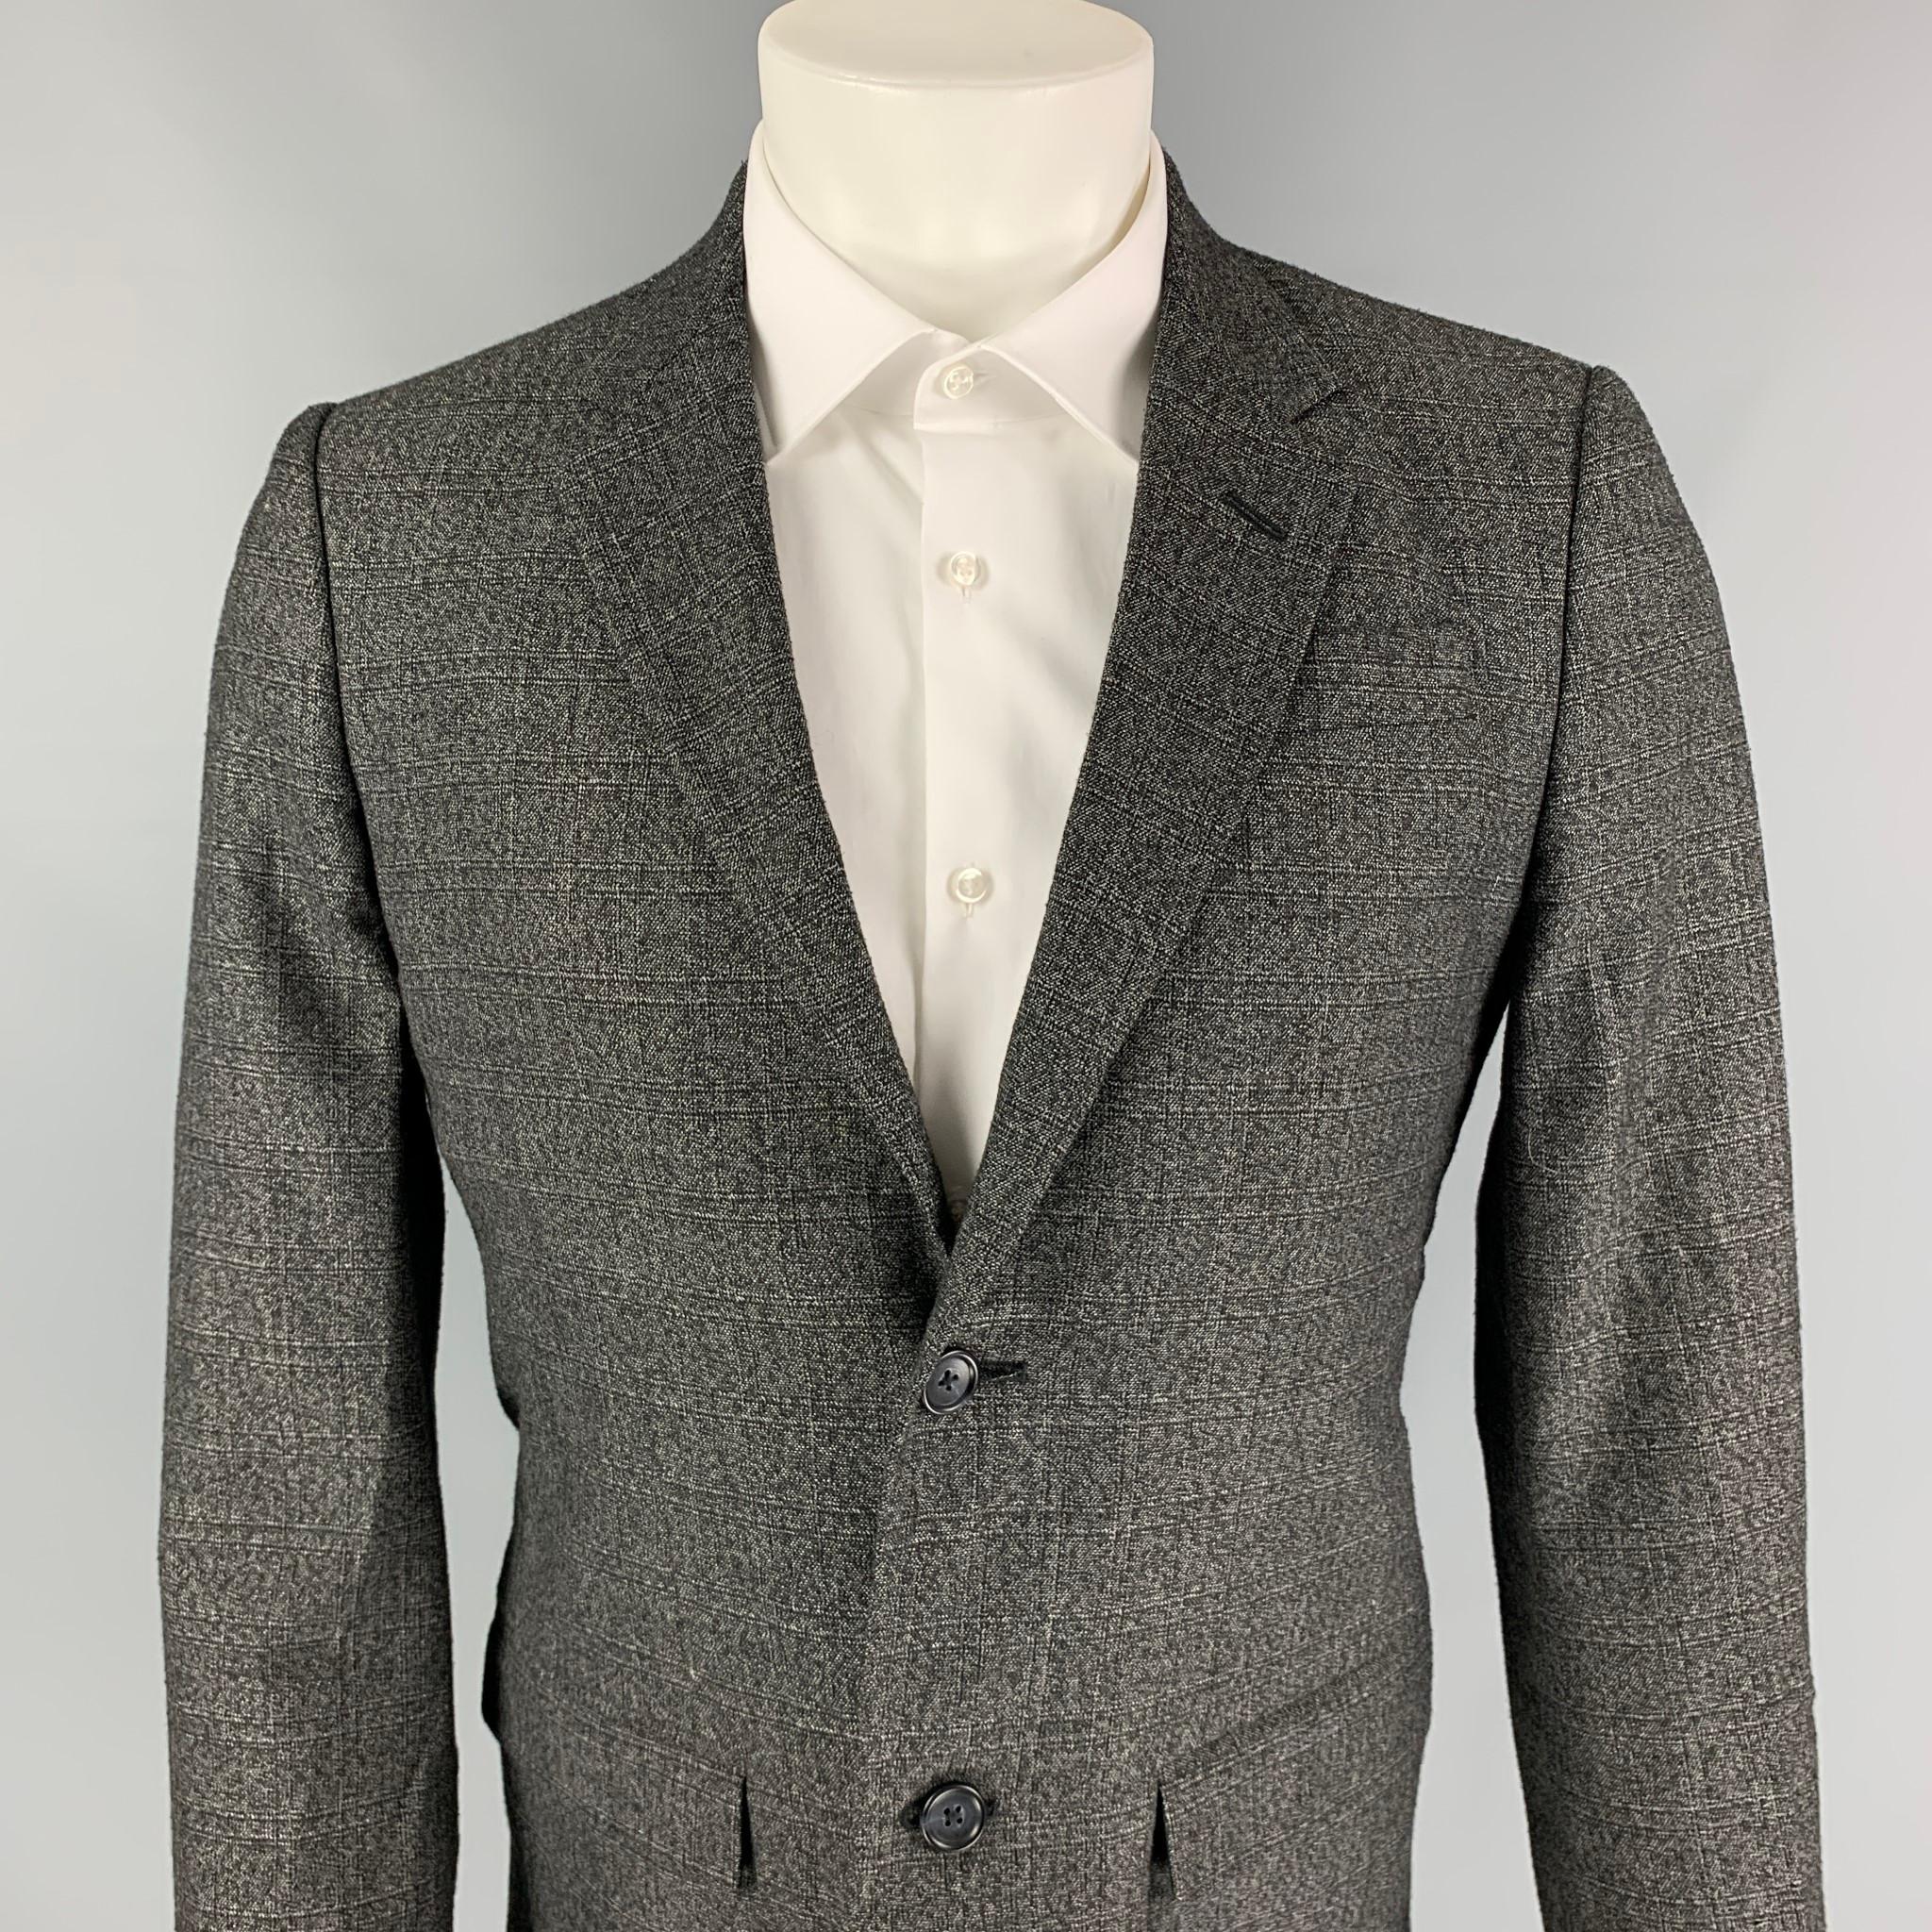 MARC by MARC JACOBS sport coat comes in a charcoal heather wool blend with a full liner featuring a notch lapel, flap pockets, and a double button closure. 

Very Good Pre-Owned Condition.
Marked: M

Measurements:

Shoulder: 17 in.
Chest: 38